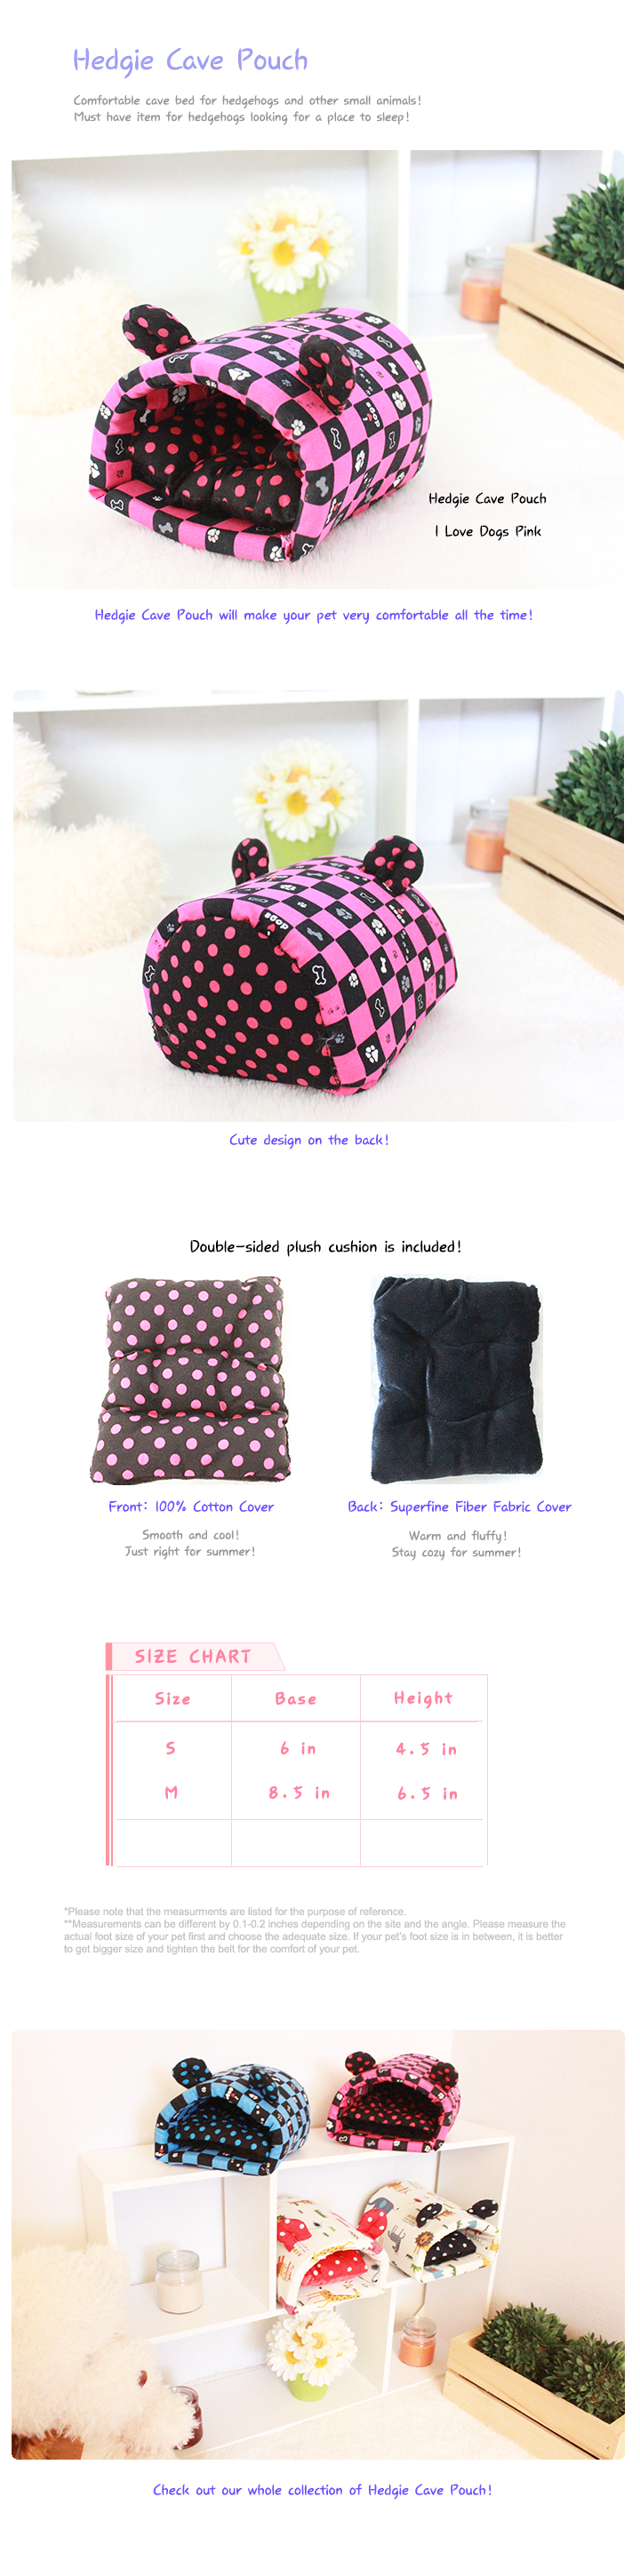 hedgie-cave-pouch-detail-pink.png